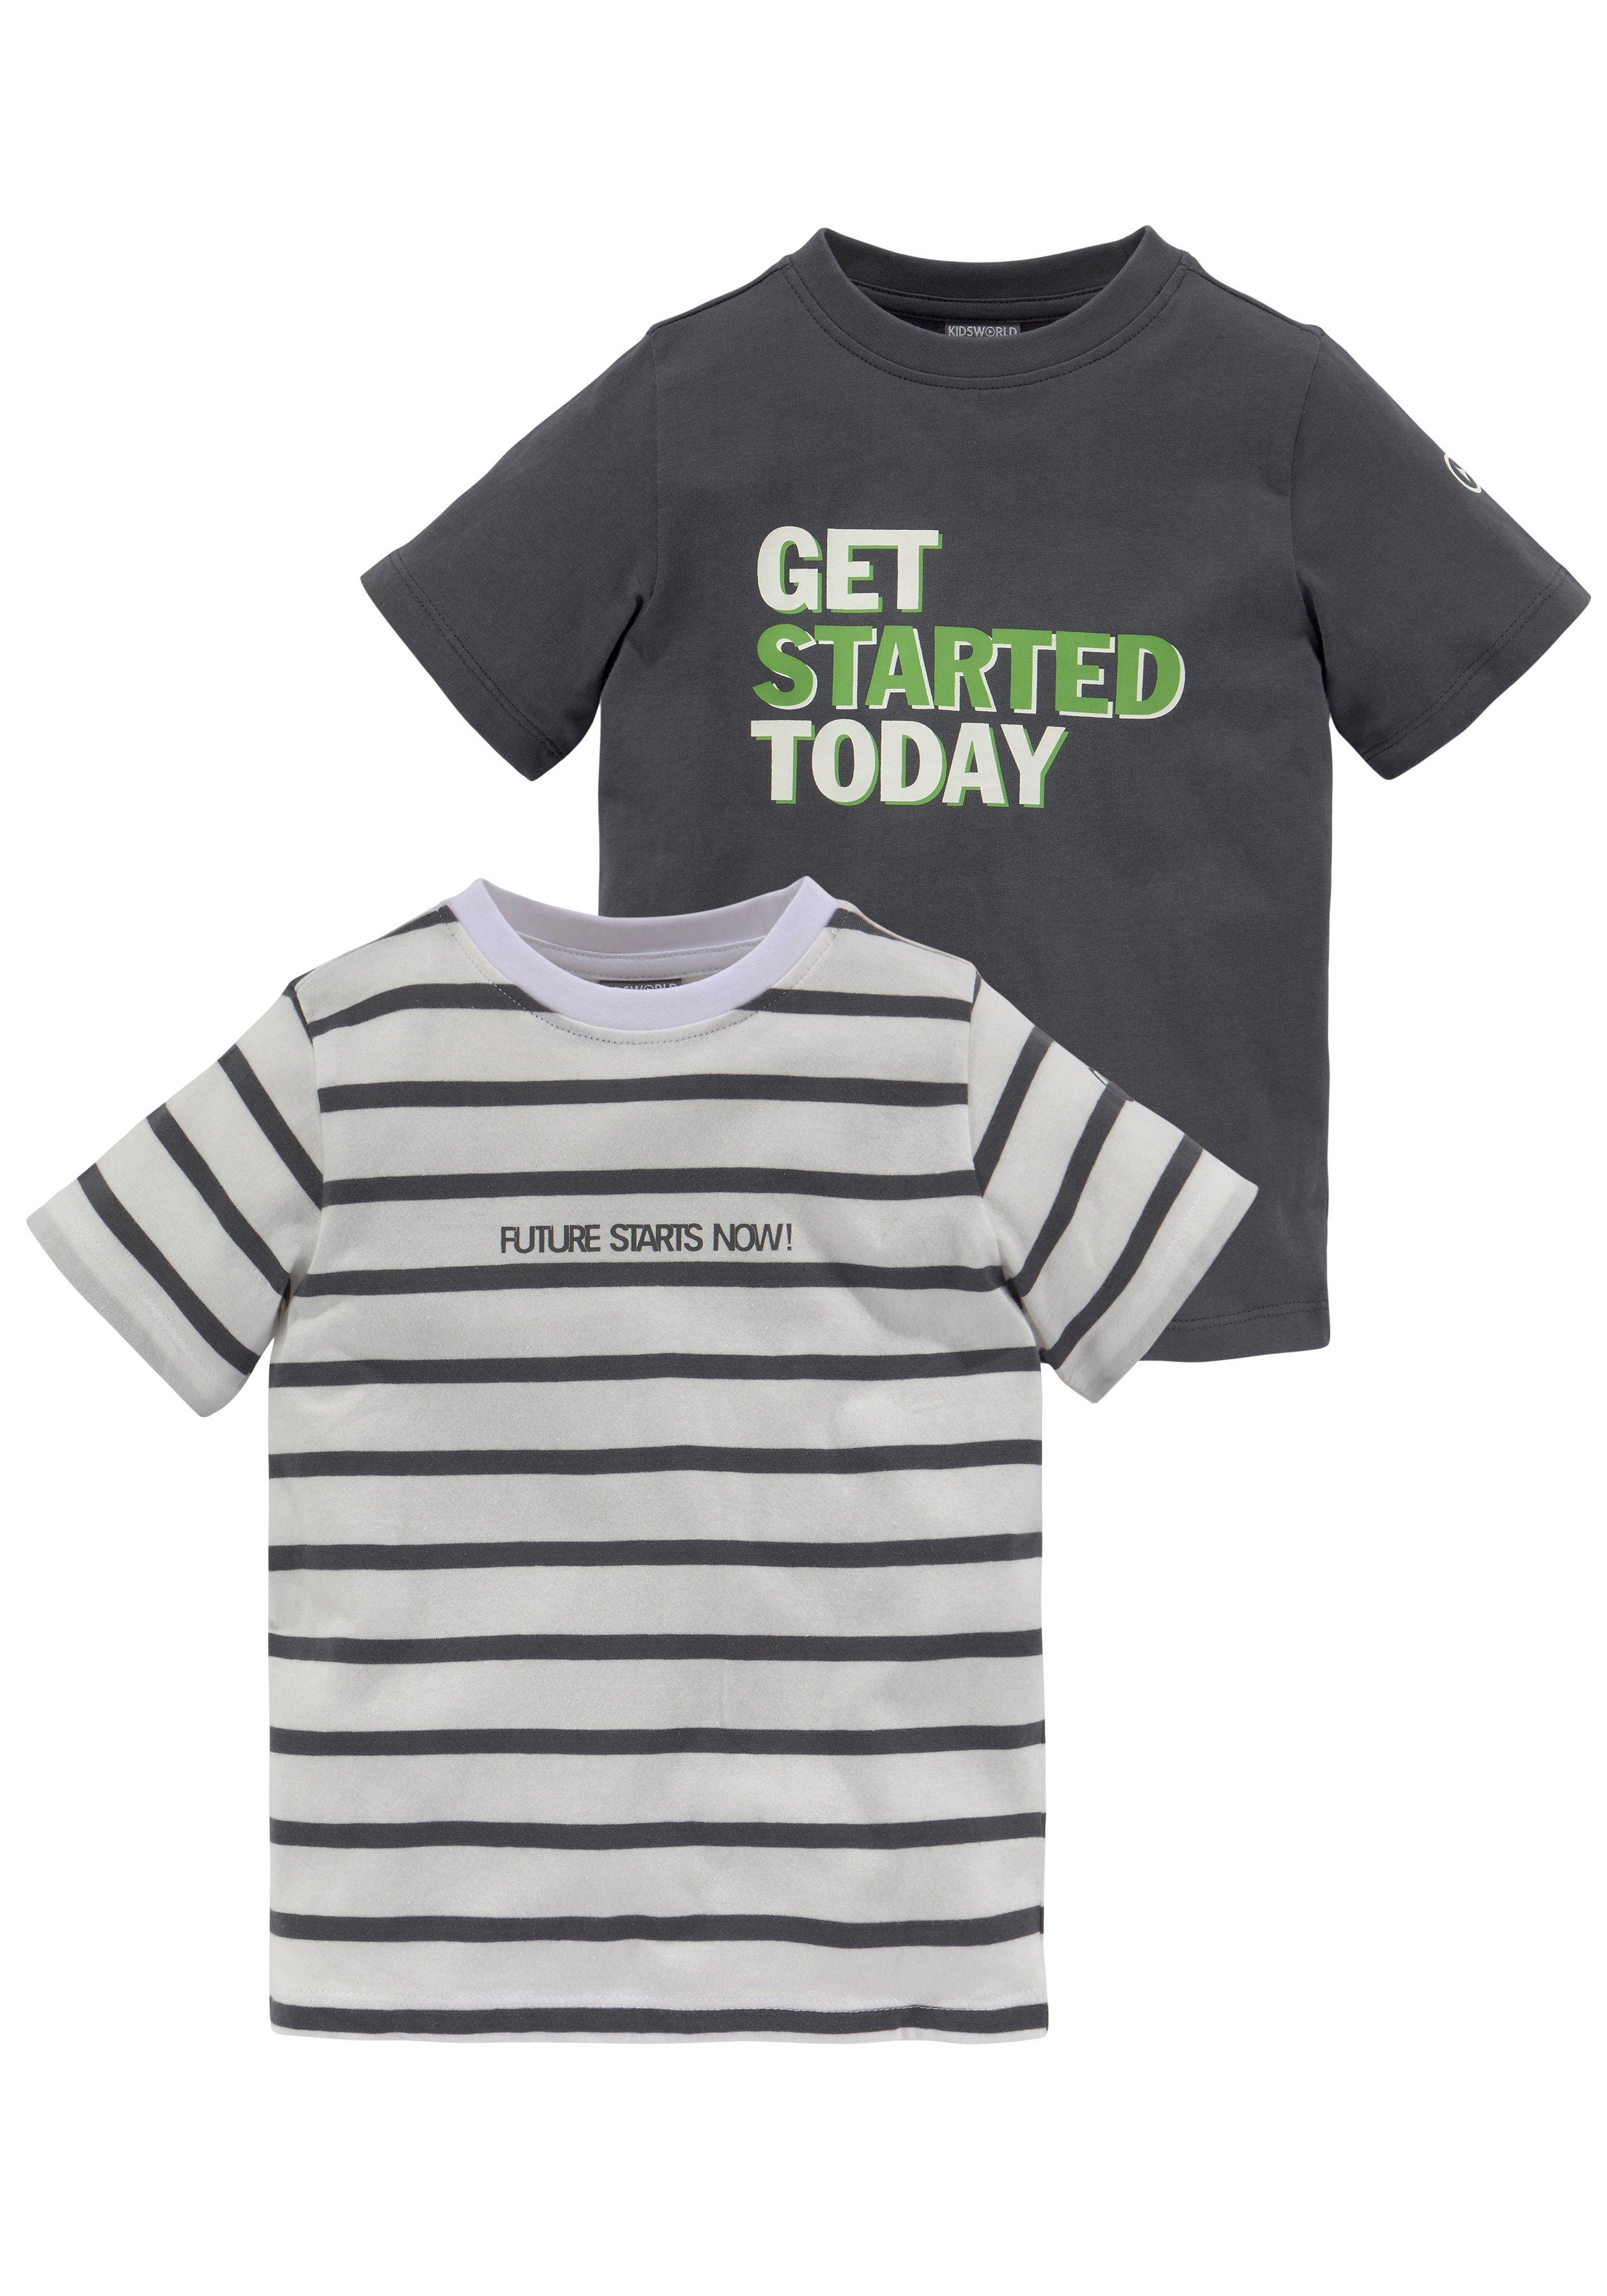 TOO TOMORROW KIDSWORLD Sprücheshirts T-Shirt 2-tlg) IS (Packung, LATE